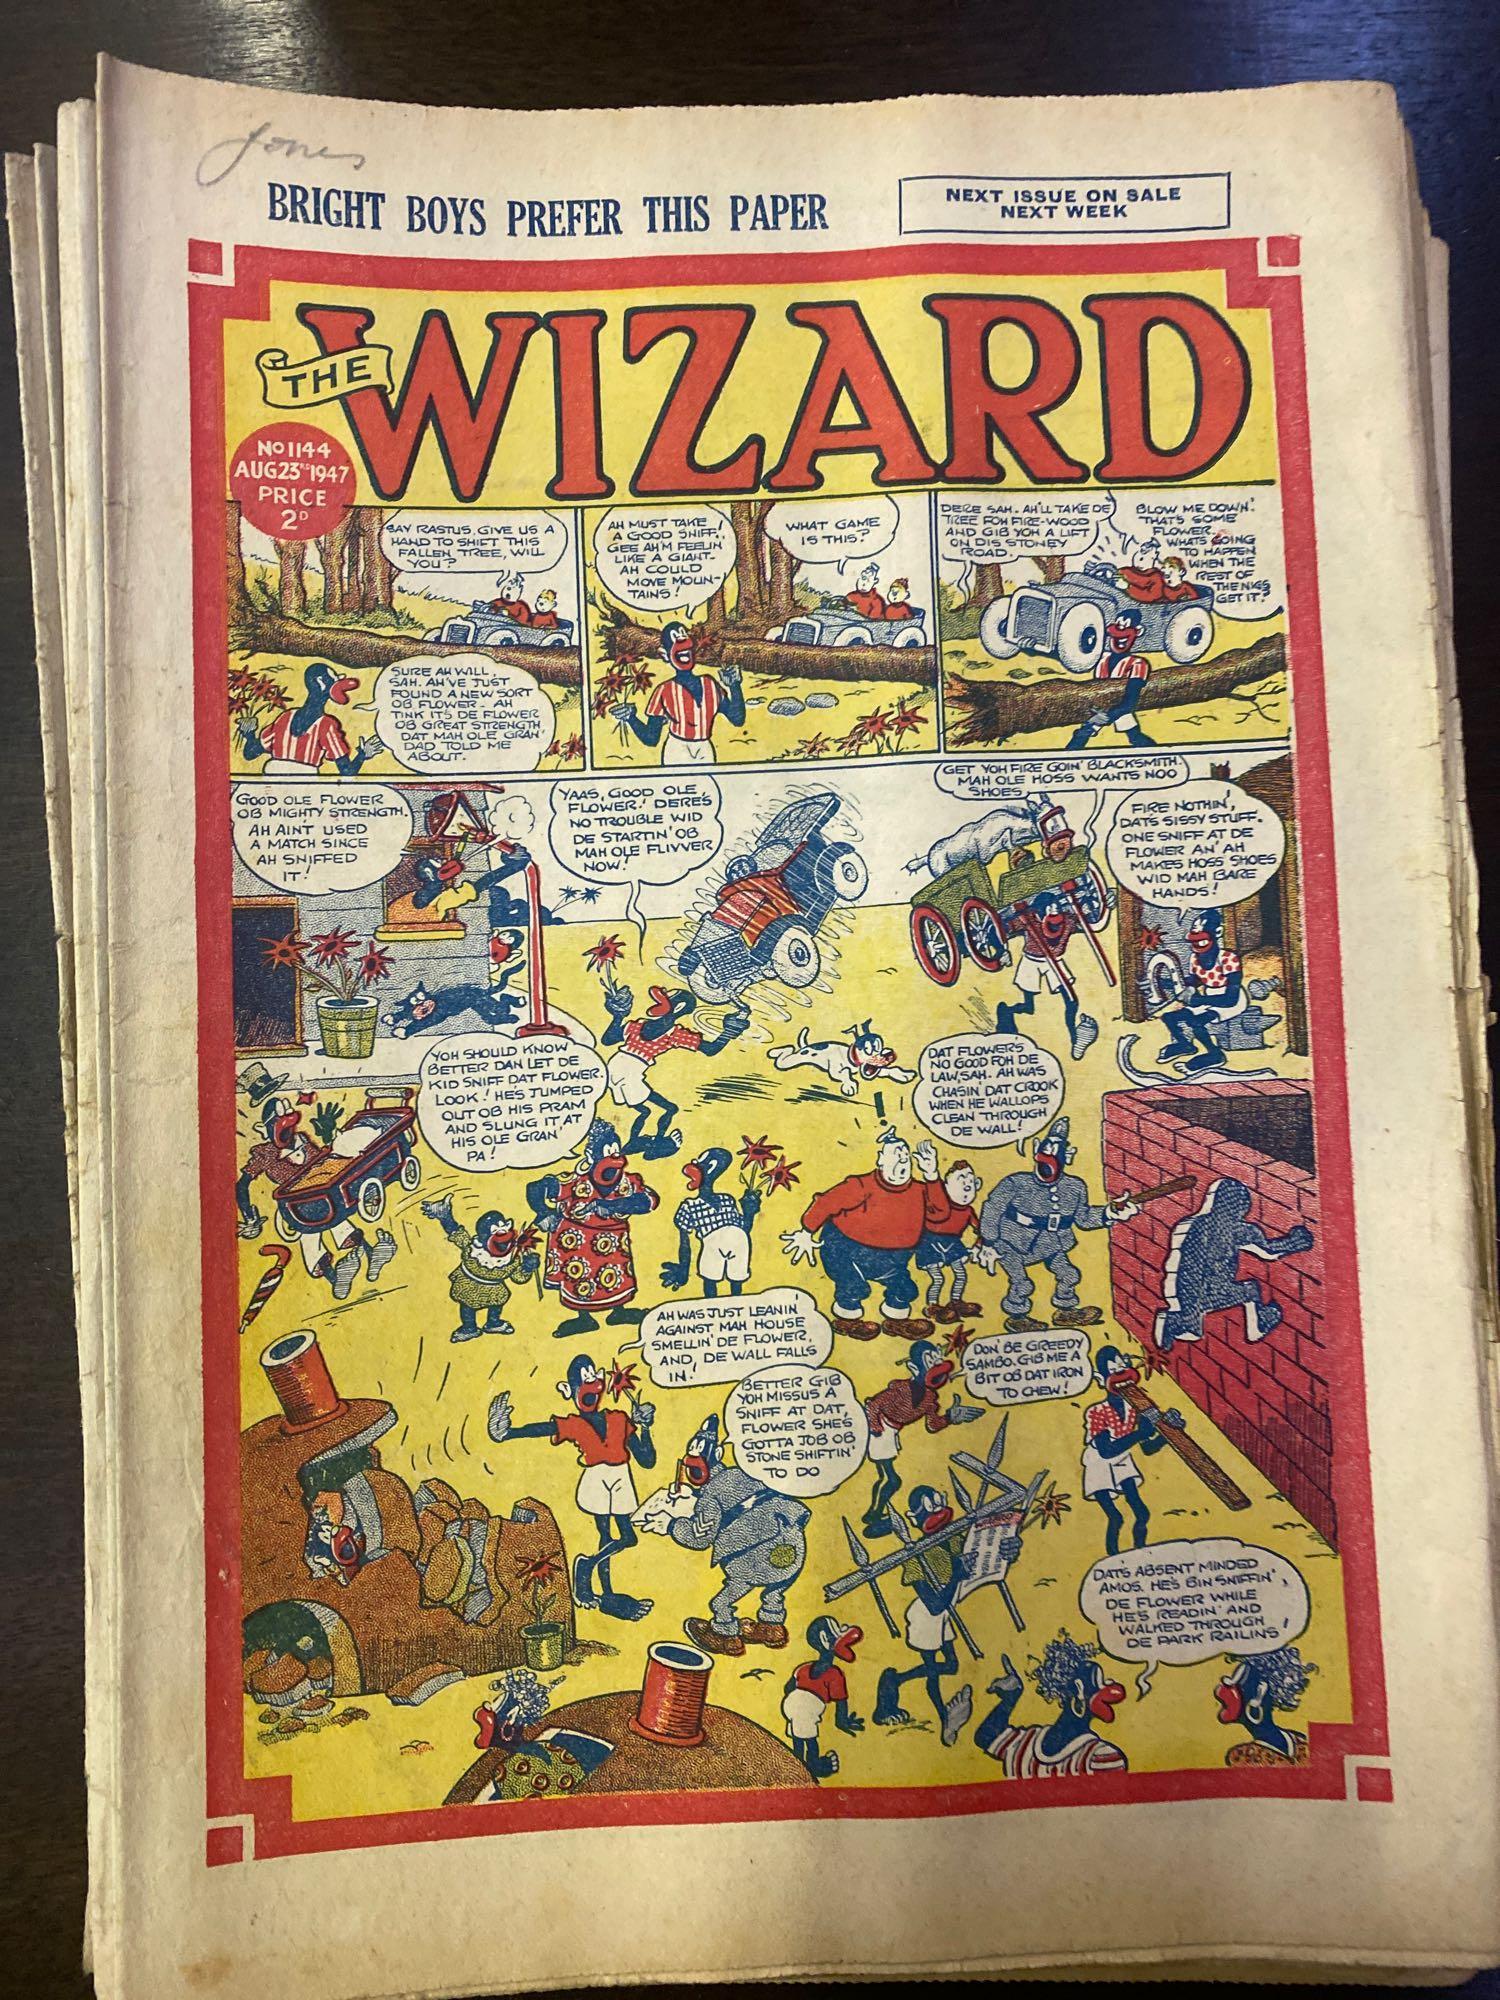 A quantity of vintage comics and childrens newspapers - Image 19 of 124